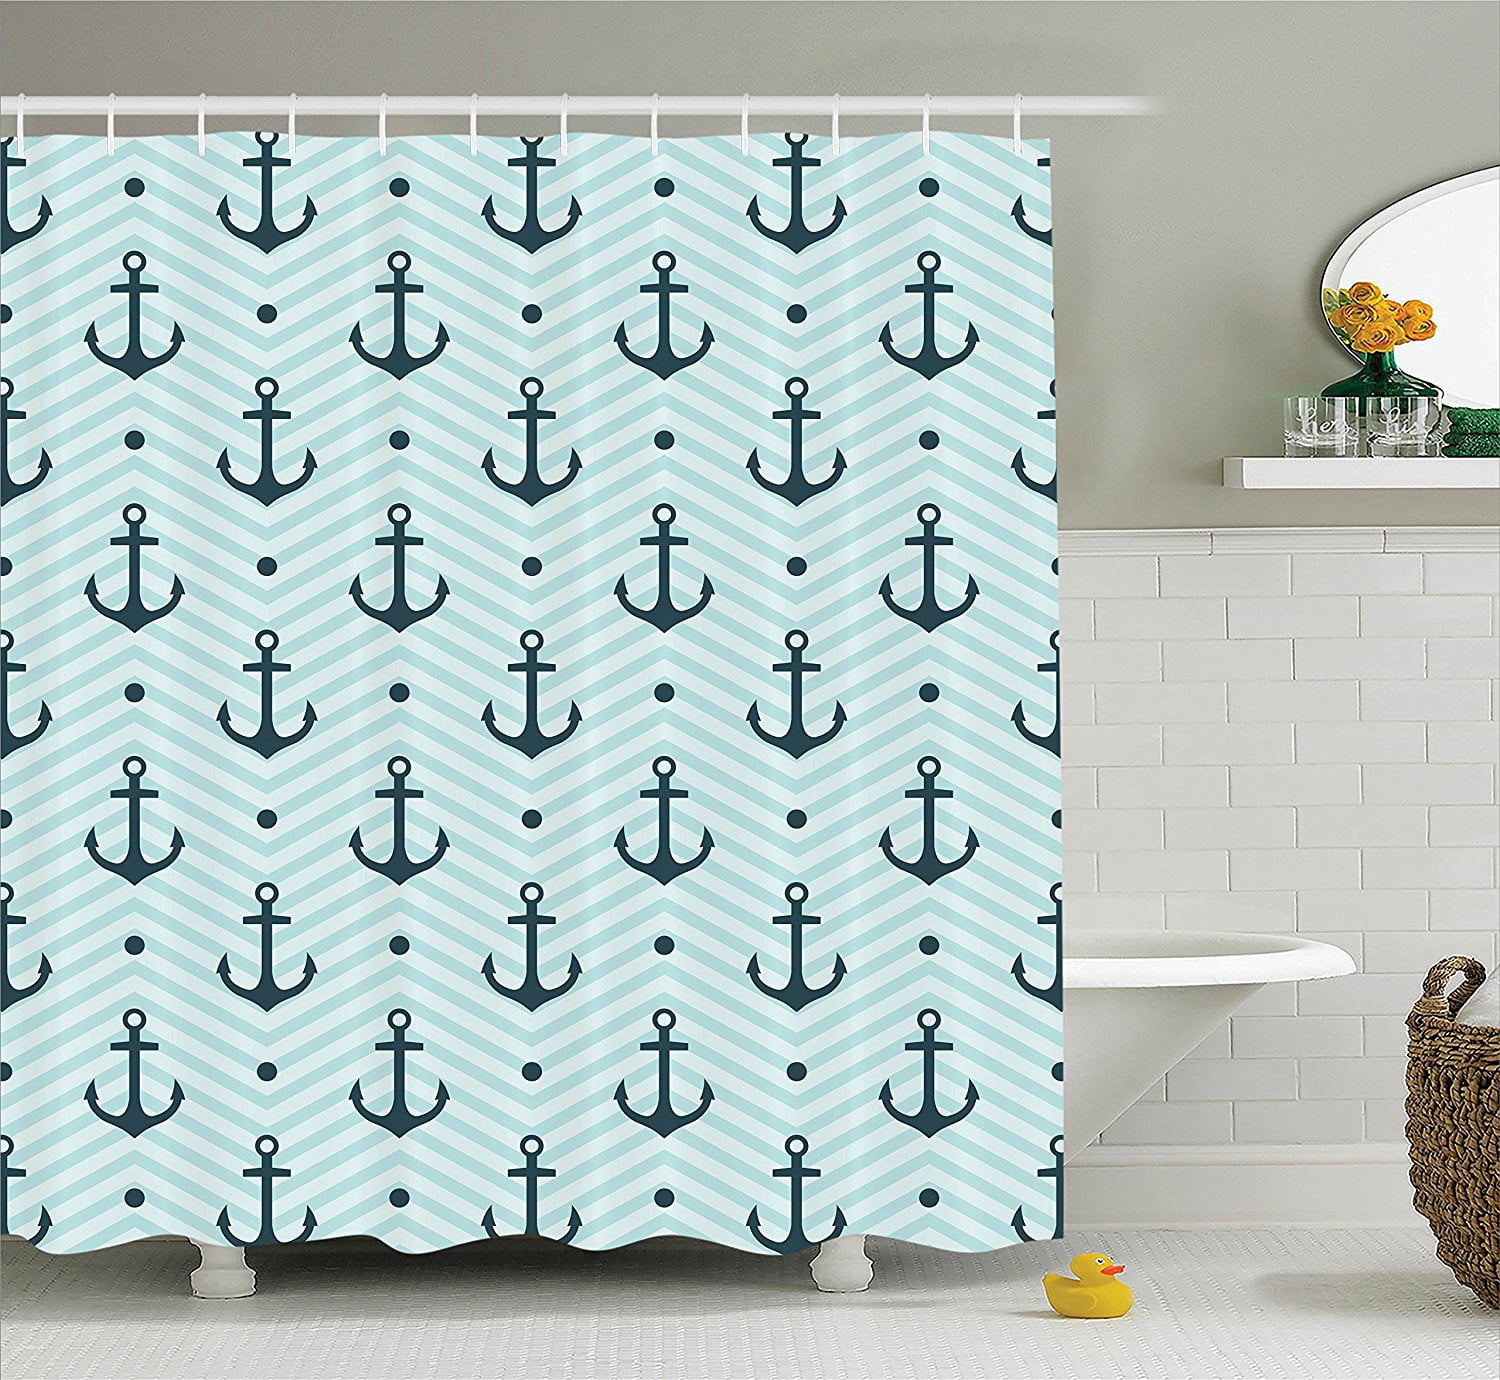 Details about   Chevron Shower Curtain Zigzags Wavy Anchor Print for Bathroom 